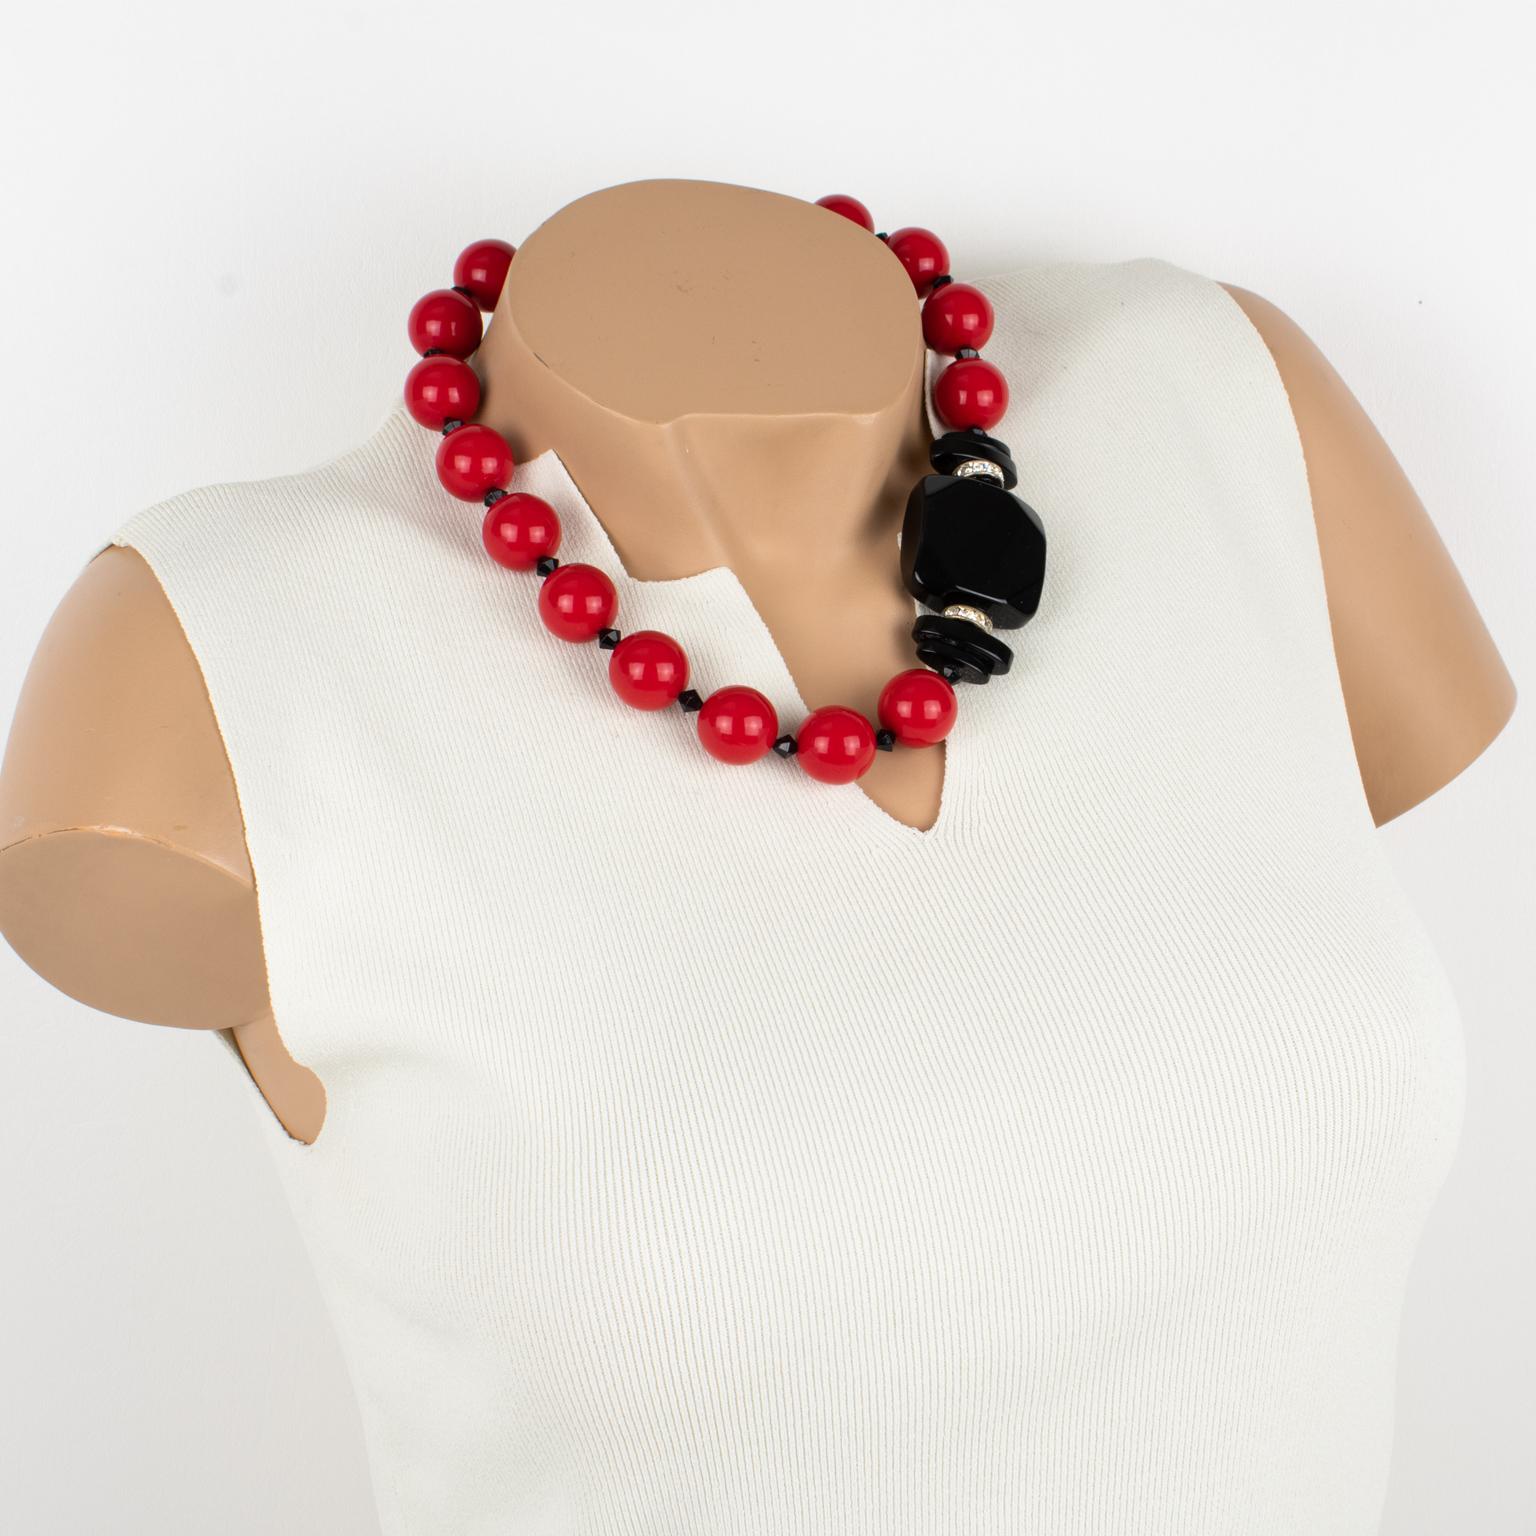 This classic Angela Caputi made-in-Italy resin choker necklace works on red and black contrast. This necklace features chunky round beads with an on-the-side square bead ornate with crystal rhinestone spacers. Her color matching is always extremely